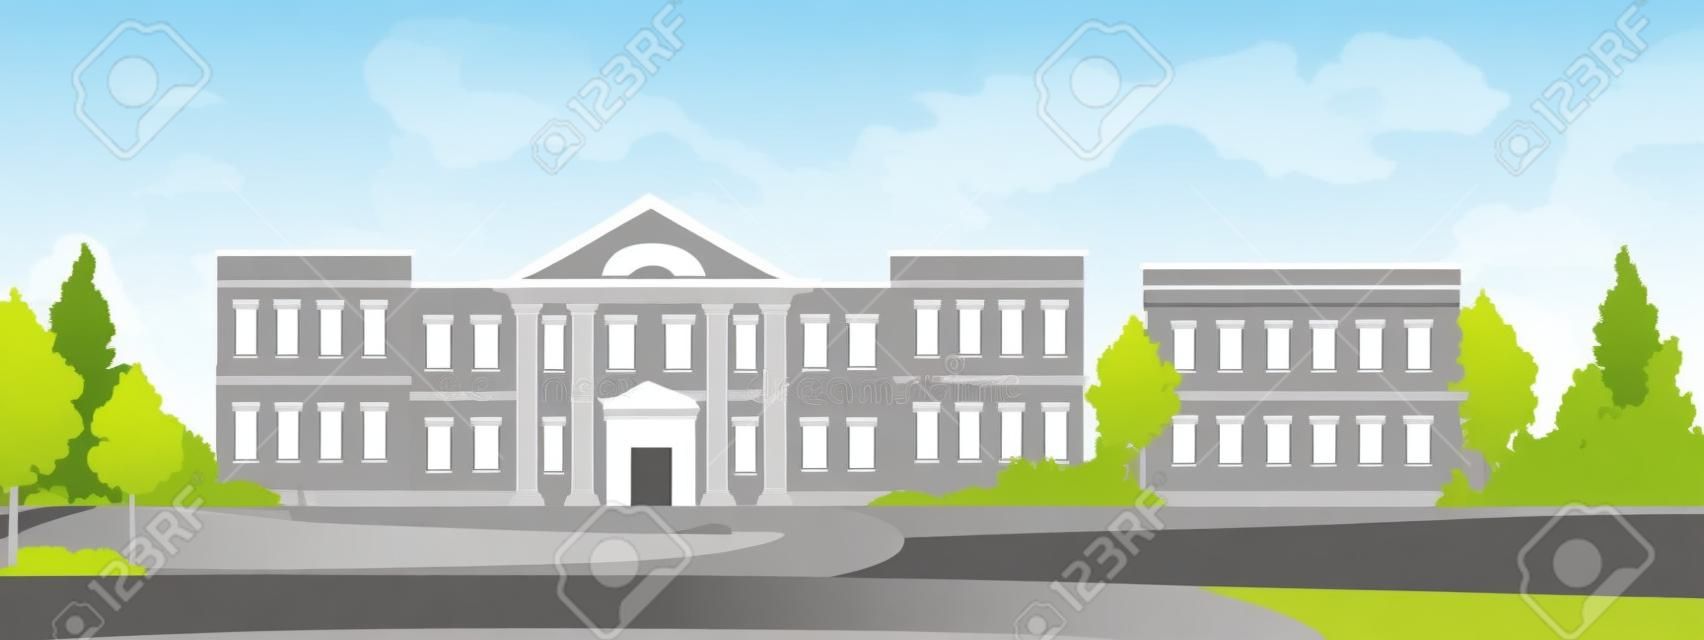 University campus city building vector illustration. Cartoon urban cityscape with college campus facade or academy for students, entrance to library, high school or university architecture background